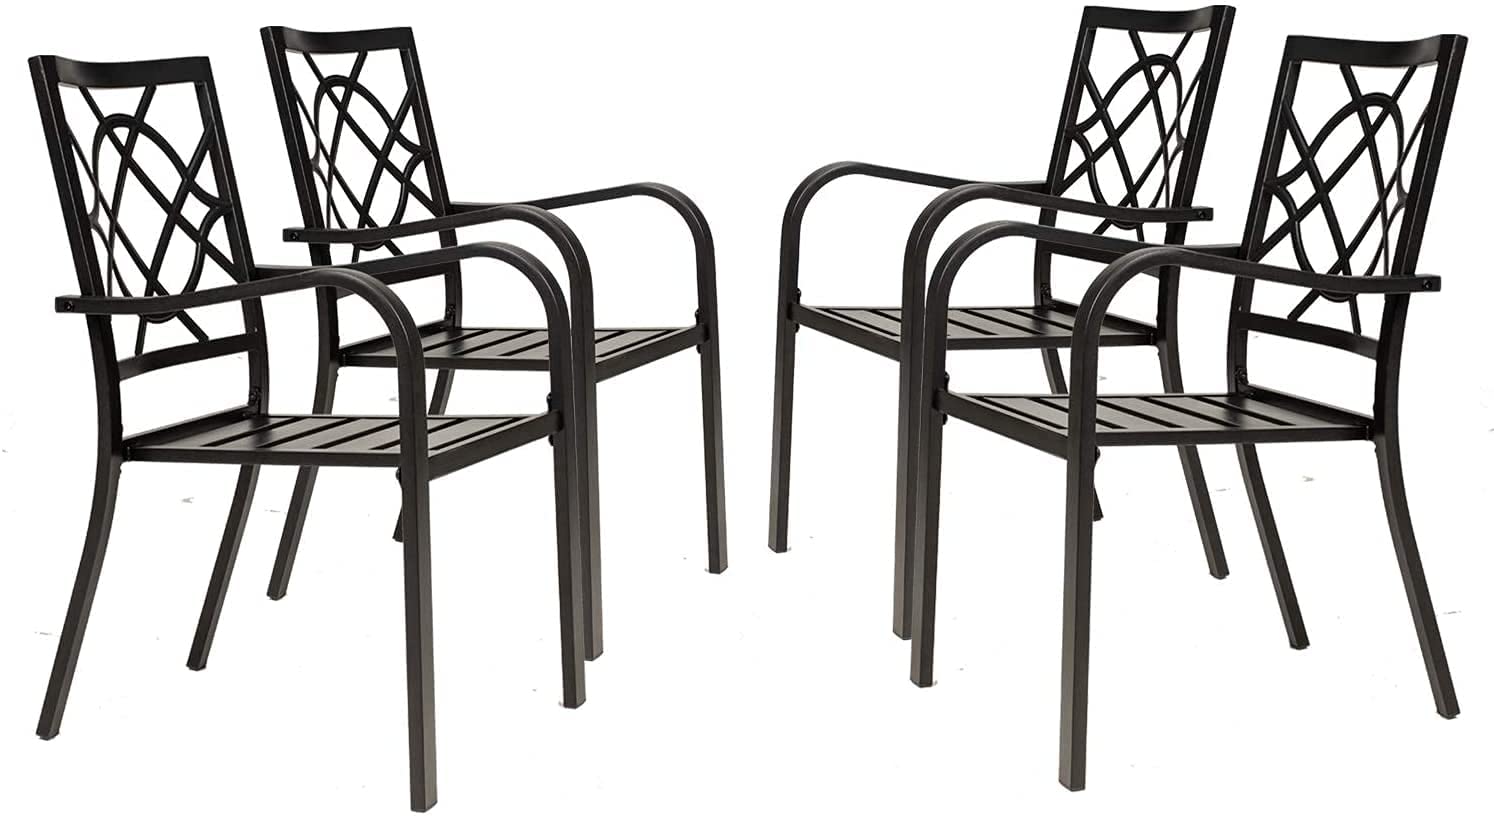 SOLAURA Outdoor Patio Stackable Wrought Iron Dining Chairs Set of 4- Black - image 1 of 7